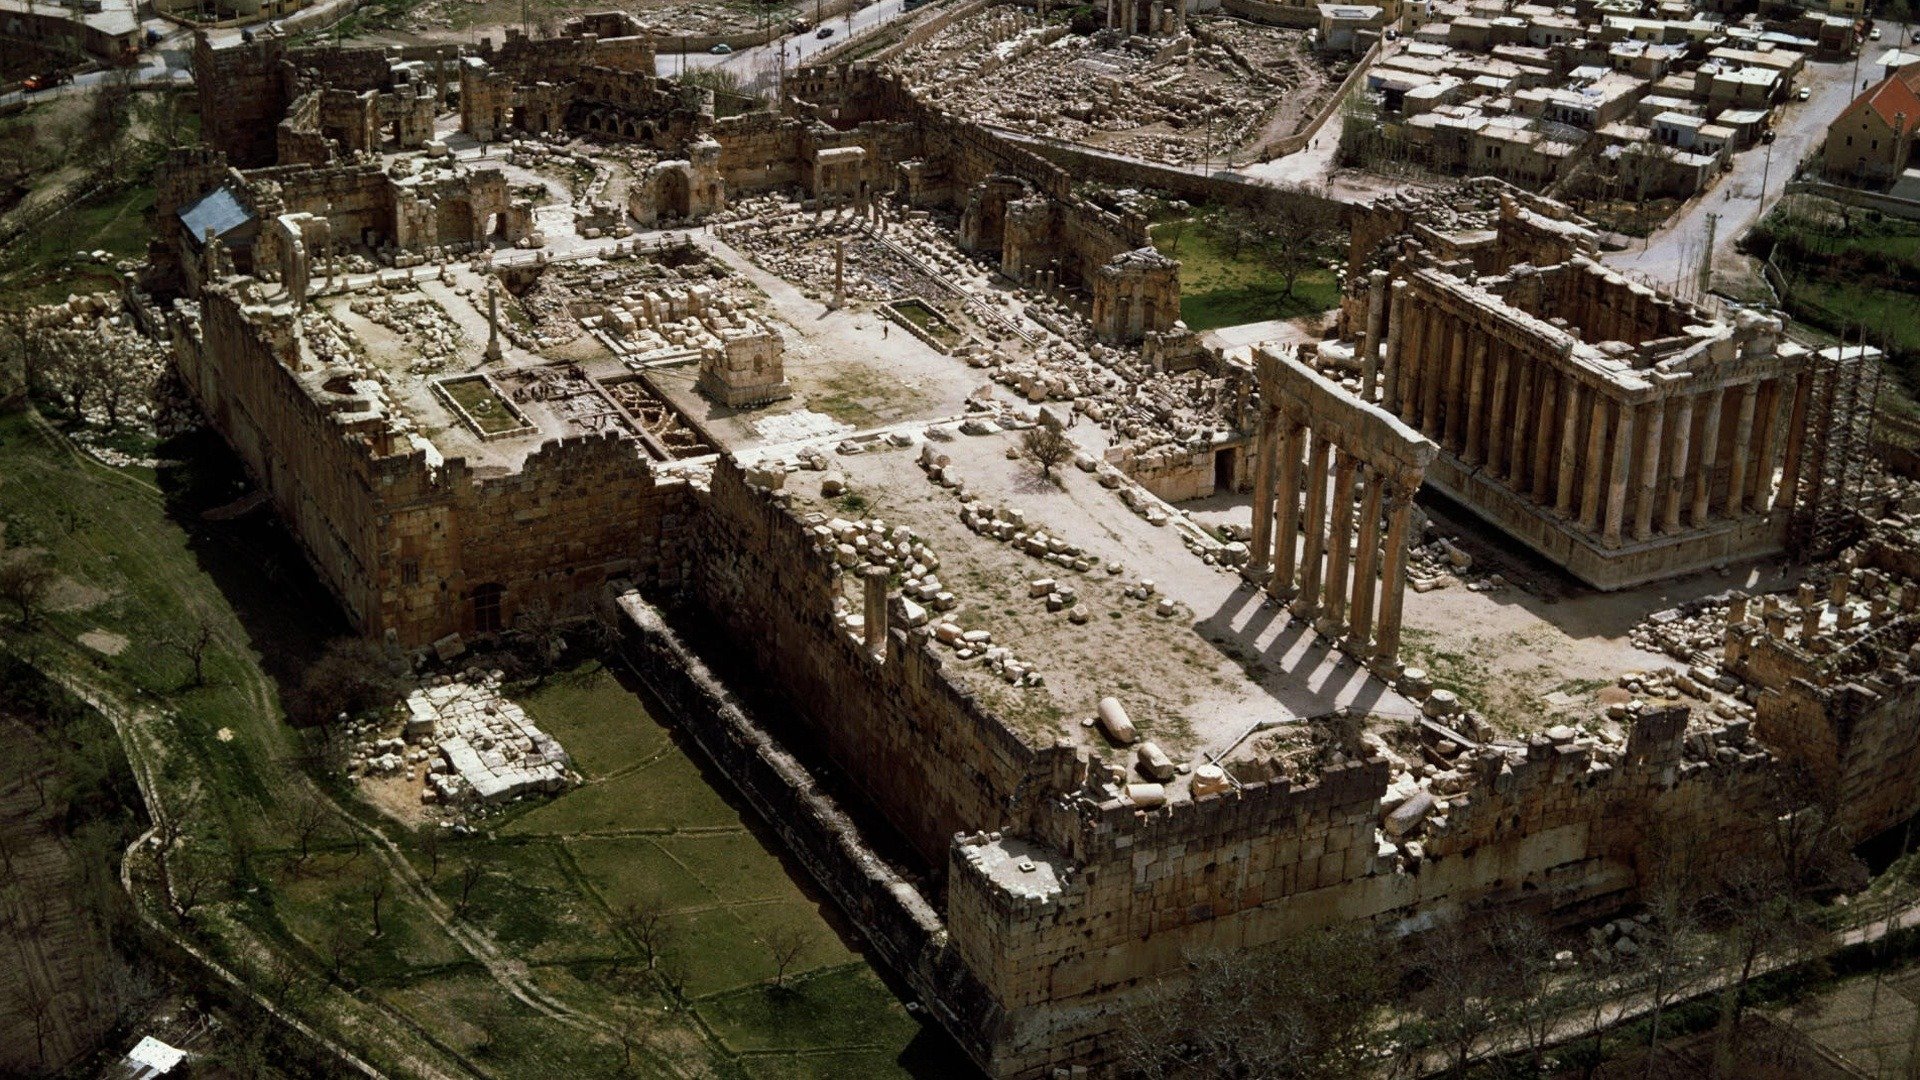 13. Wonders of the Ancient World